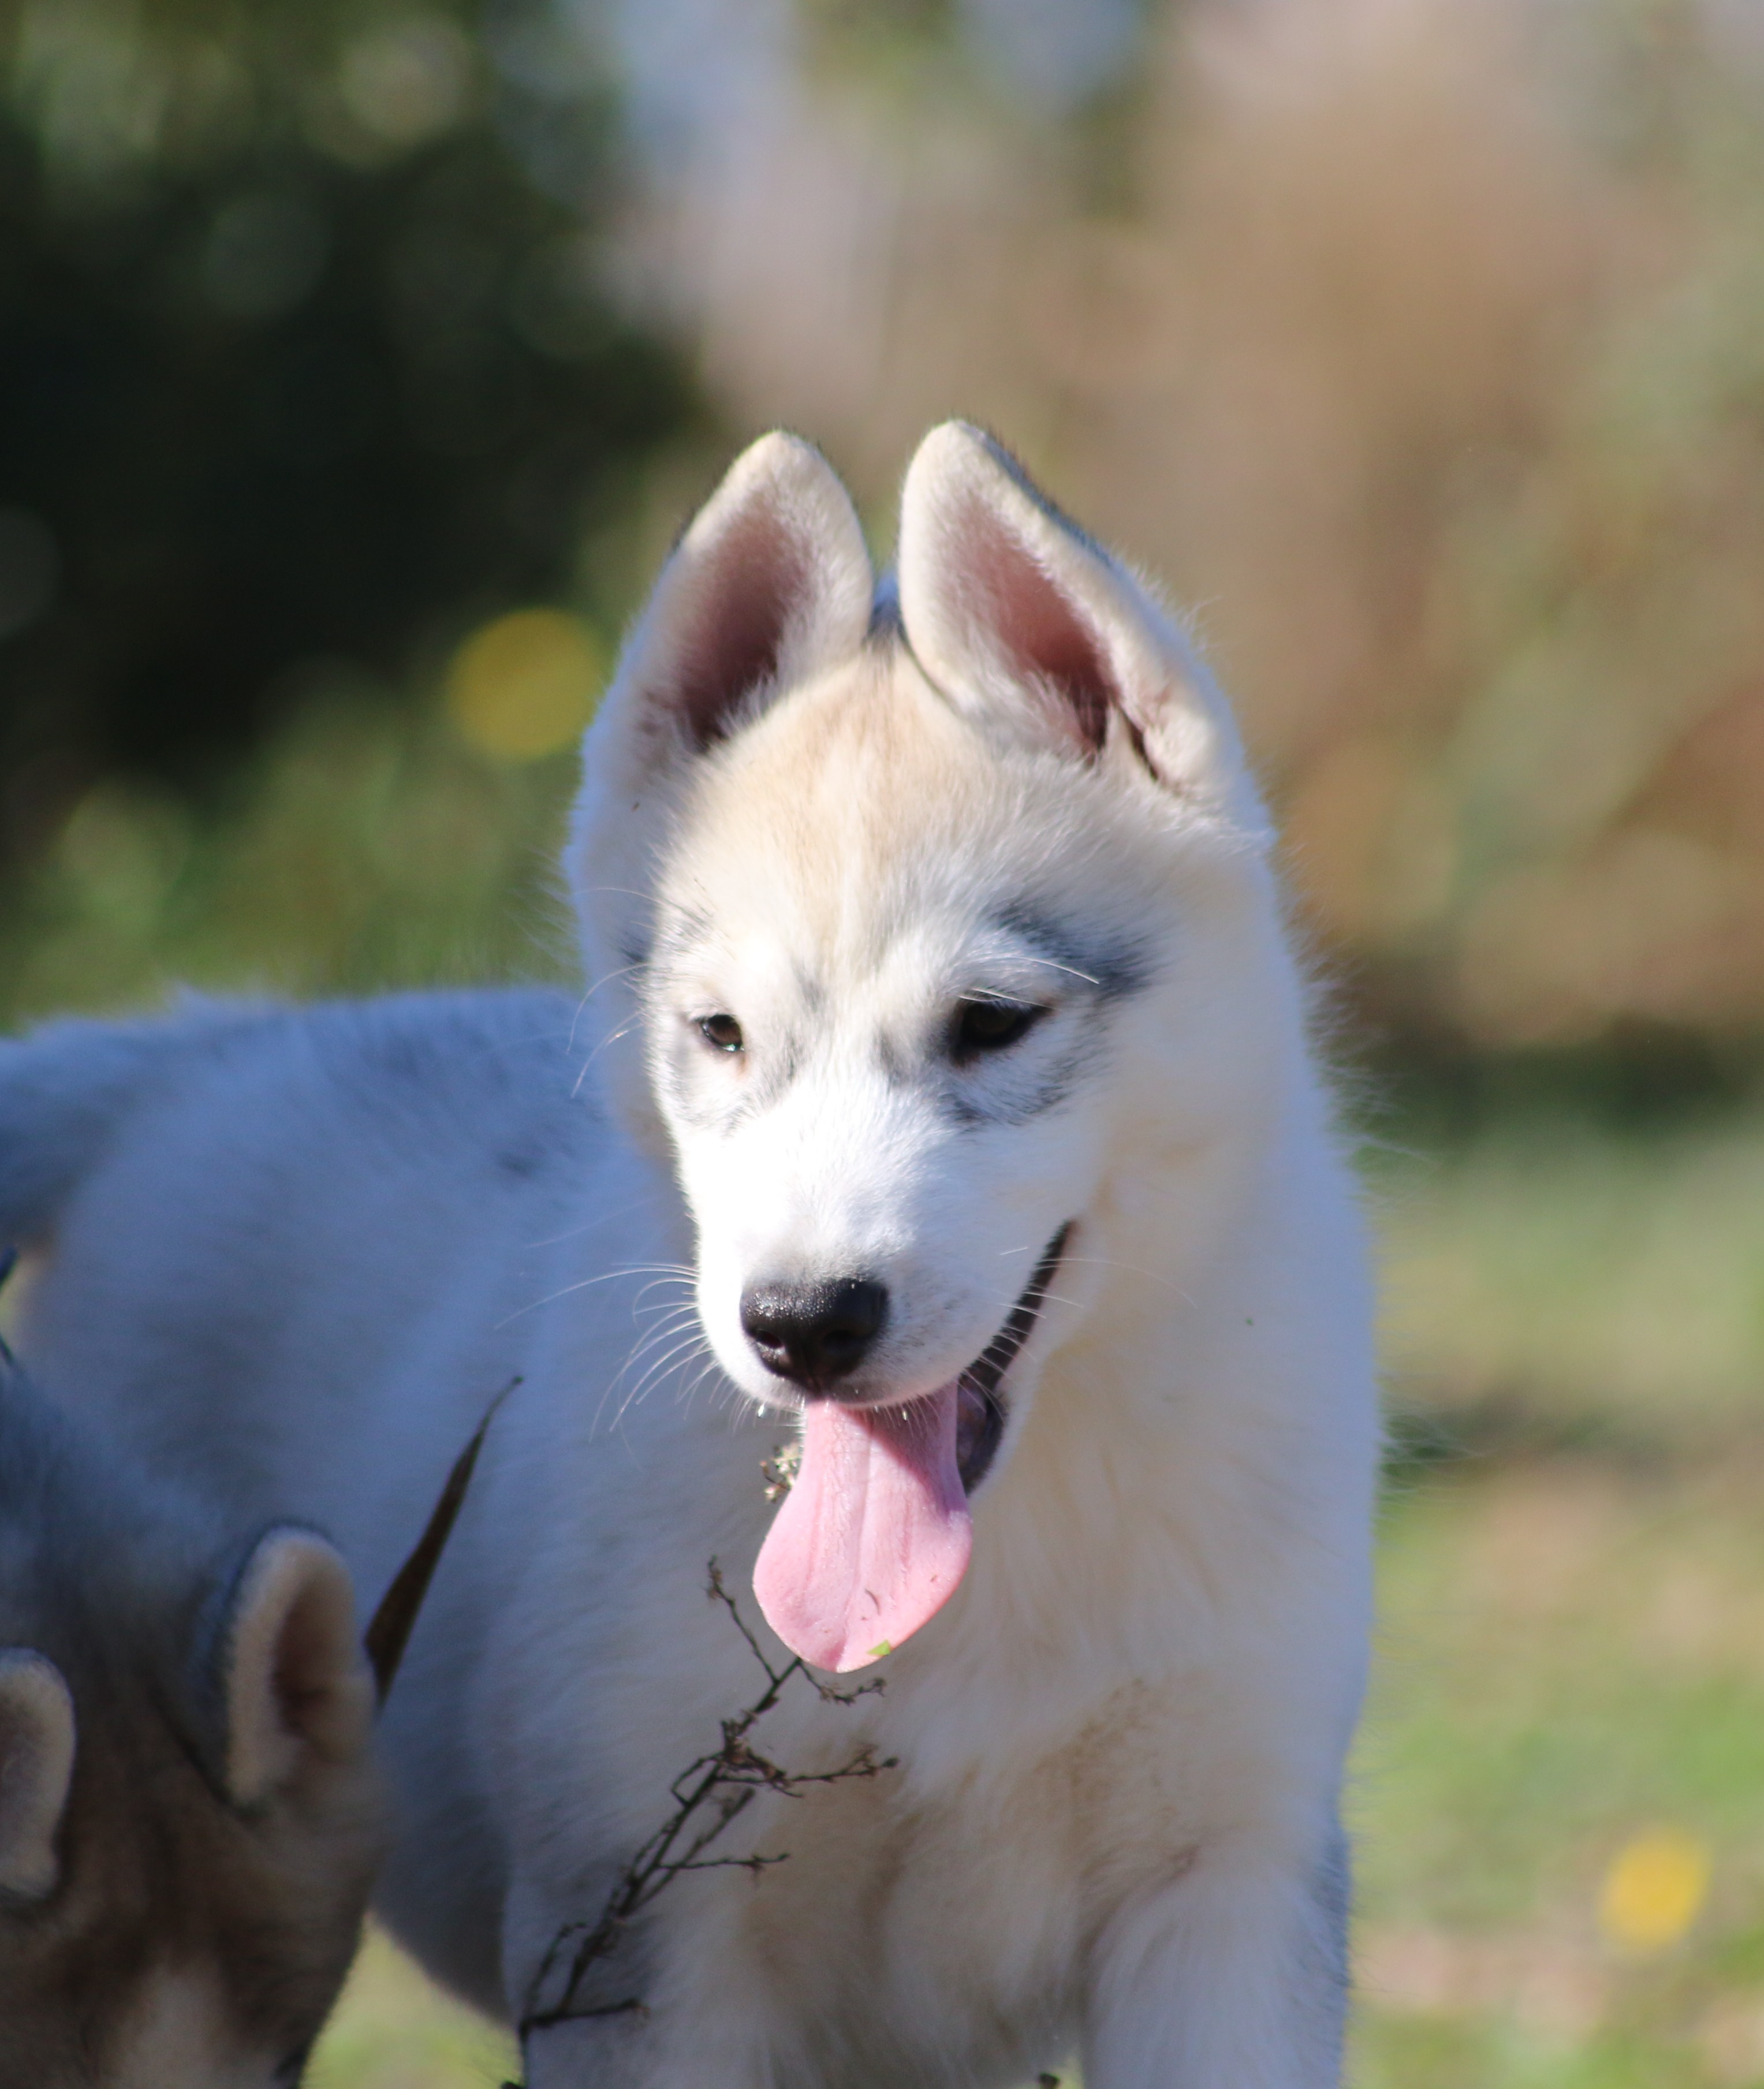 Of Wolf Siberian Song - Chiot disponible  - Siberian Husky